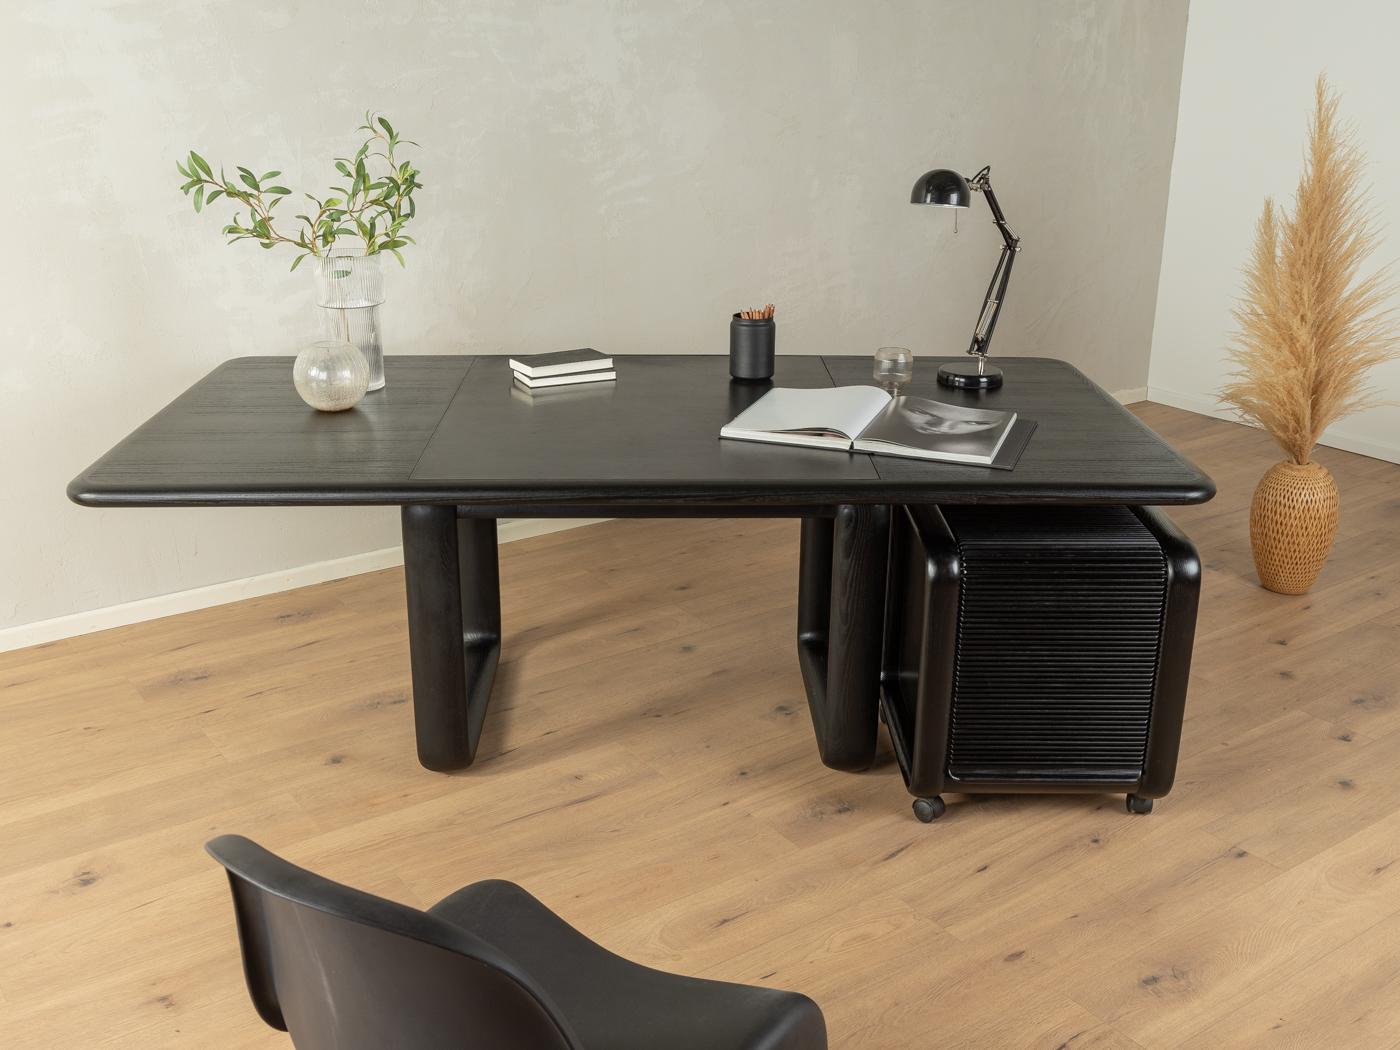 Hombre desk with trolley by Burkhard Vogtherr for Rosenthal from the 1970s. High-quality solid frame and veneered table top in black stained ash with a leather writing surface, a compartment for writing utensils and solid wood edges. Trolley